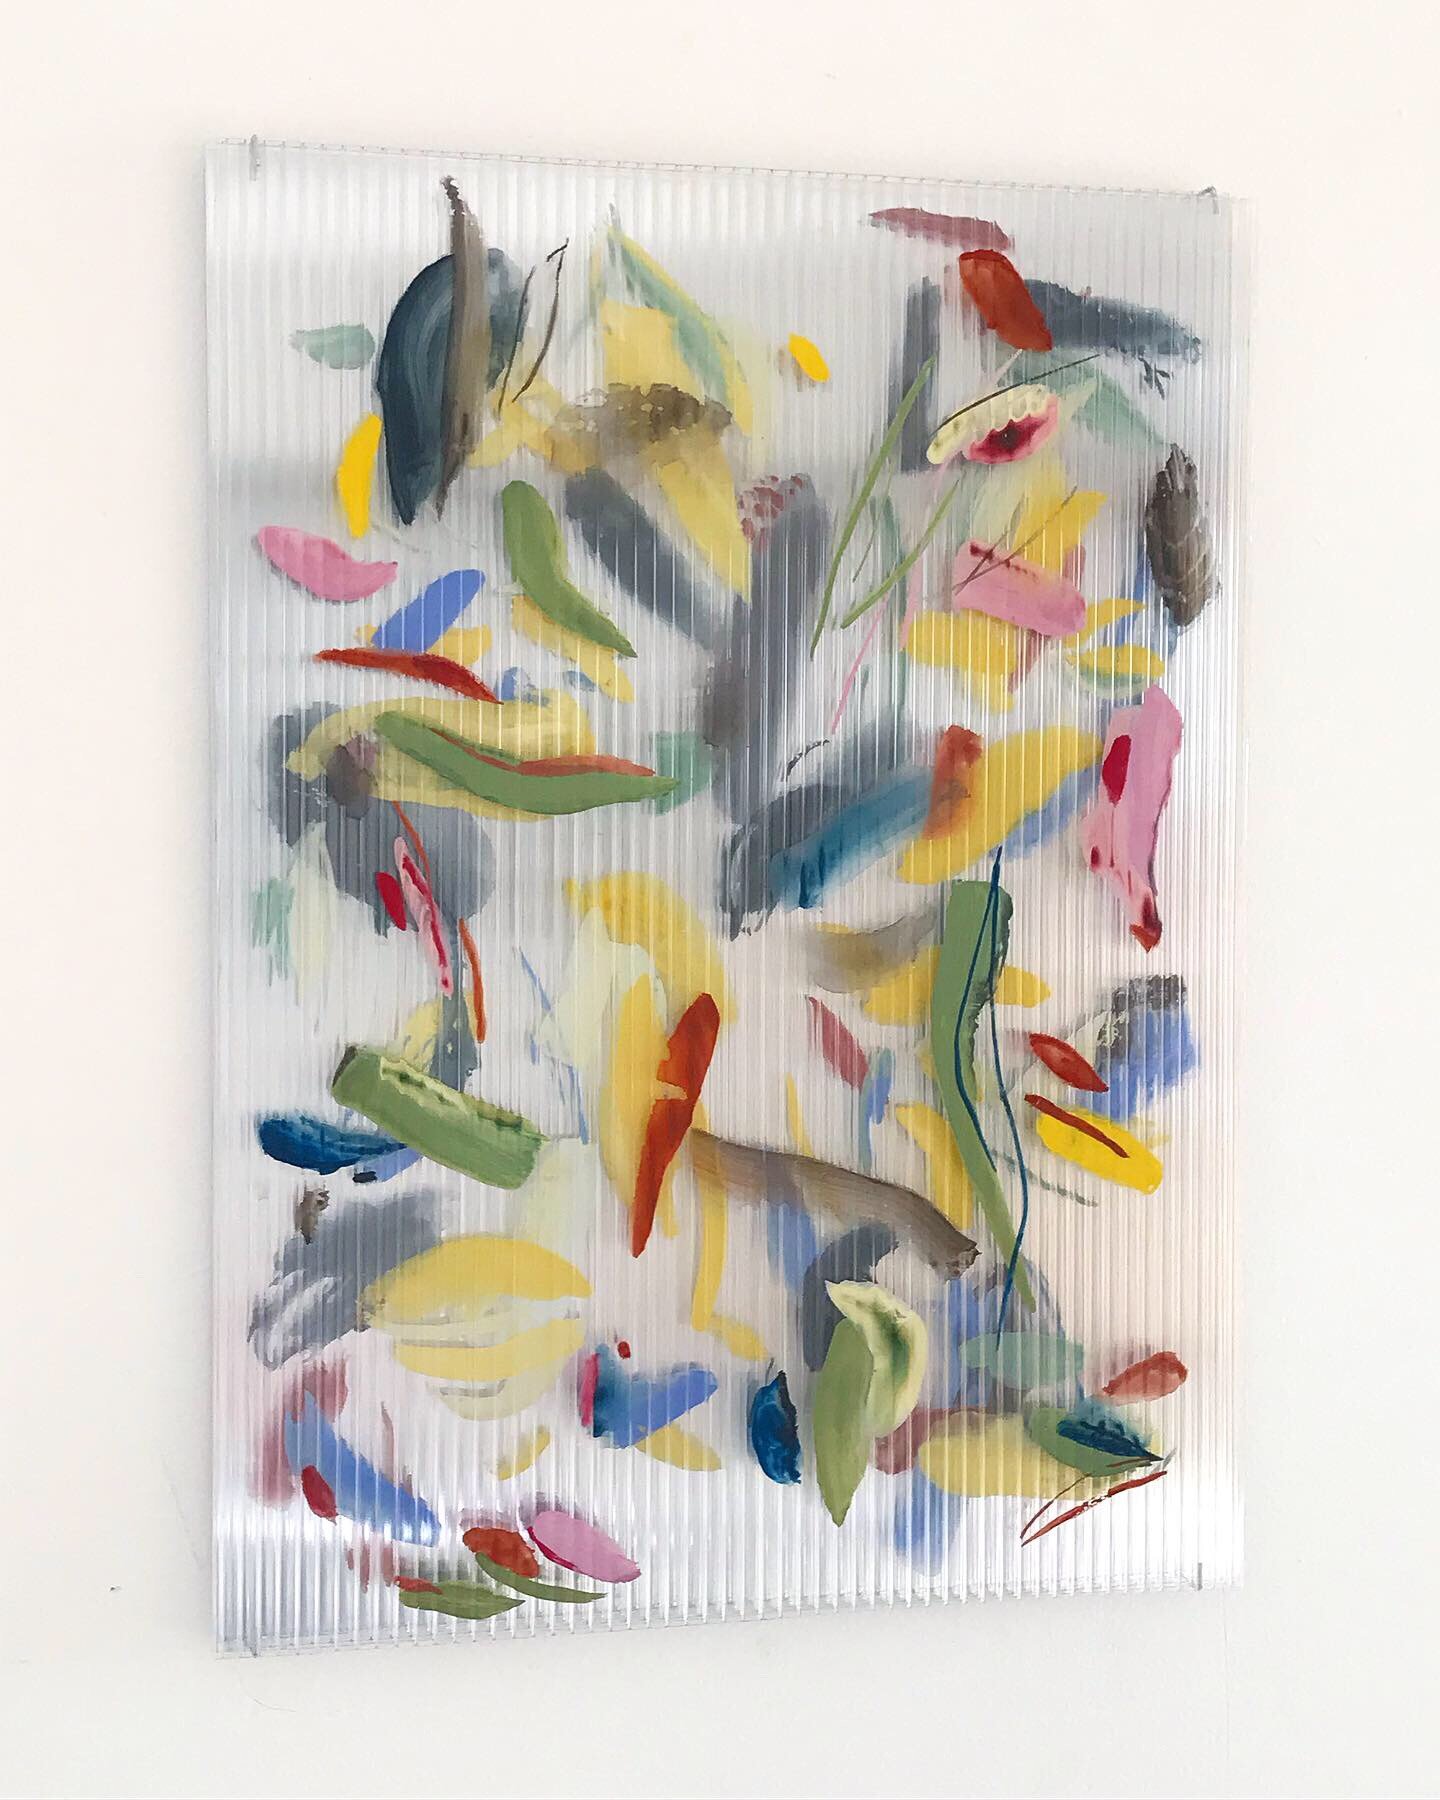   Fireflies I , 2019 Gouache on polycarbonate, two-way mirror 46 x 33.5 cm  private collection 